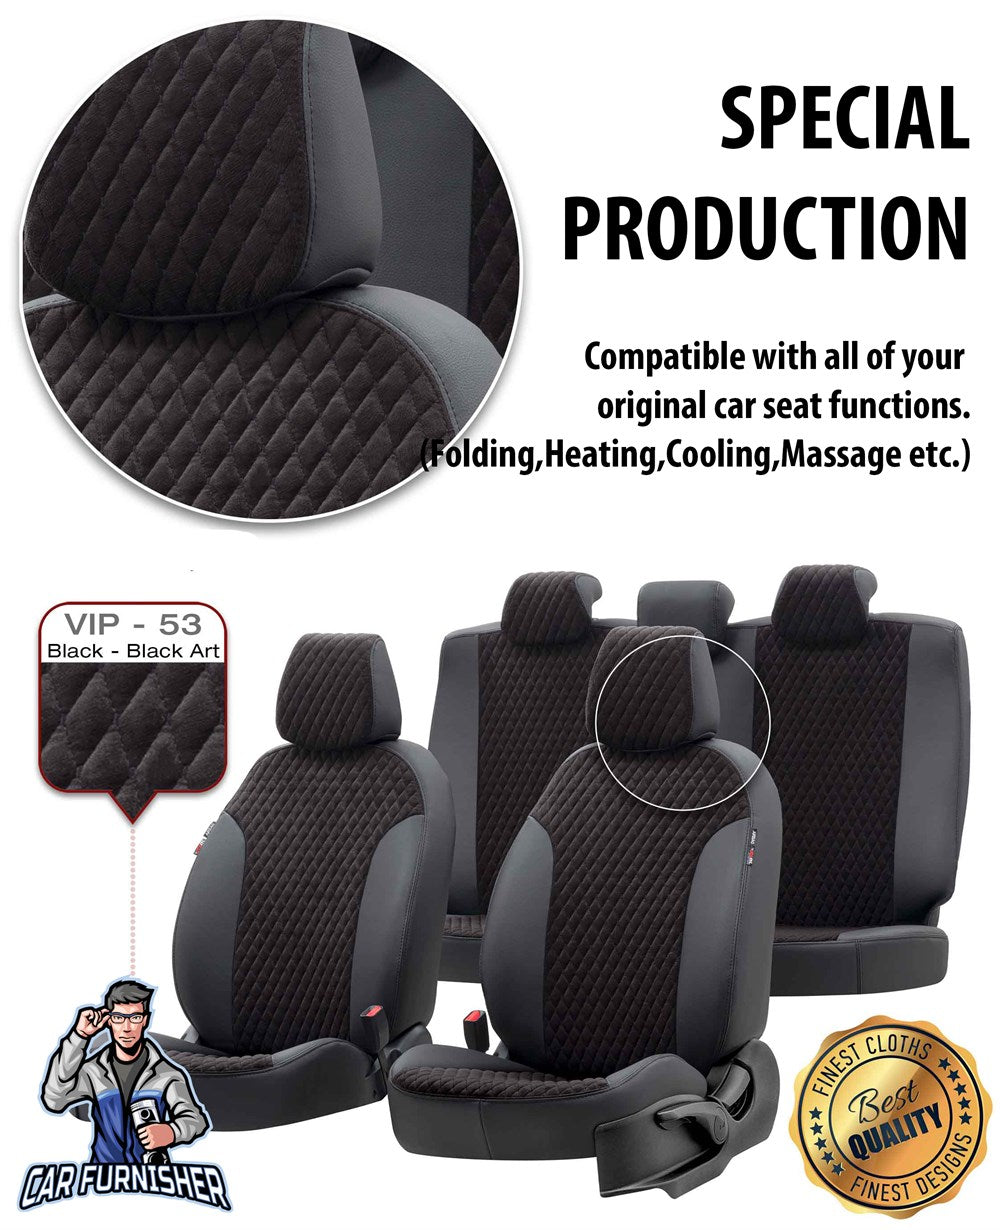 Chevrolet Nova Seat Covers Amsterdam Foal Feather Design Smoked Black Leather & Foal Feather